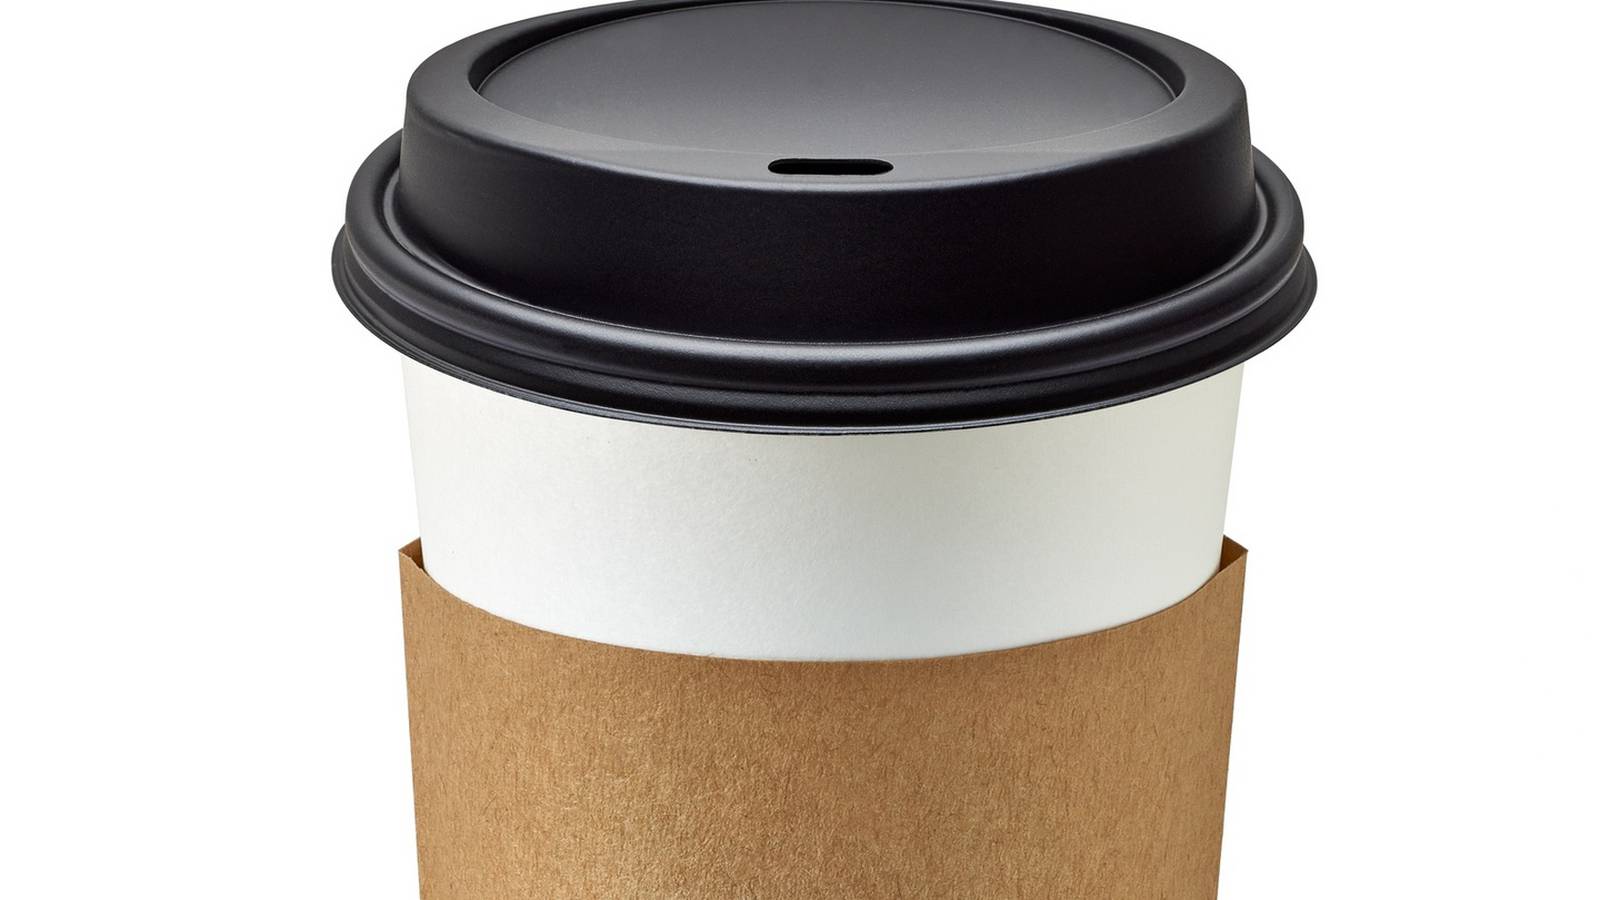 Reusable or Disposable: Which coffee cup has a smaller footprint?